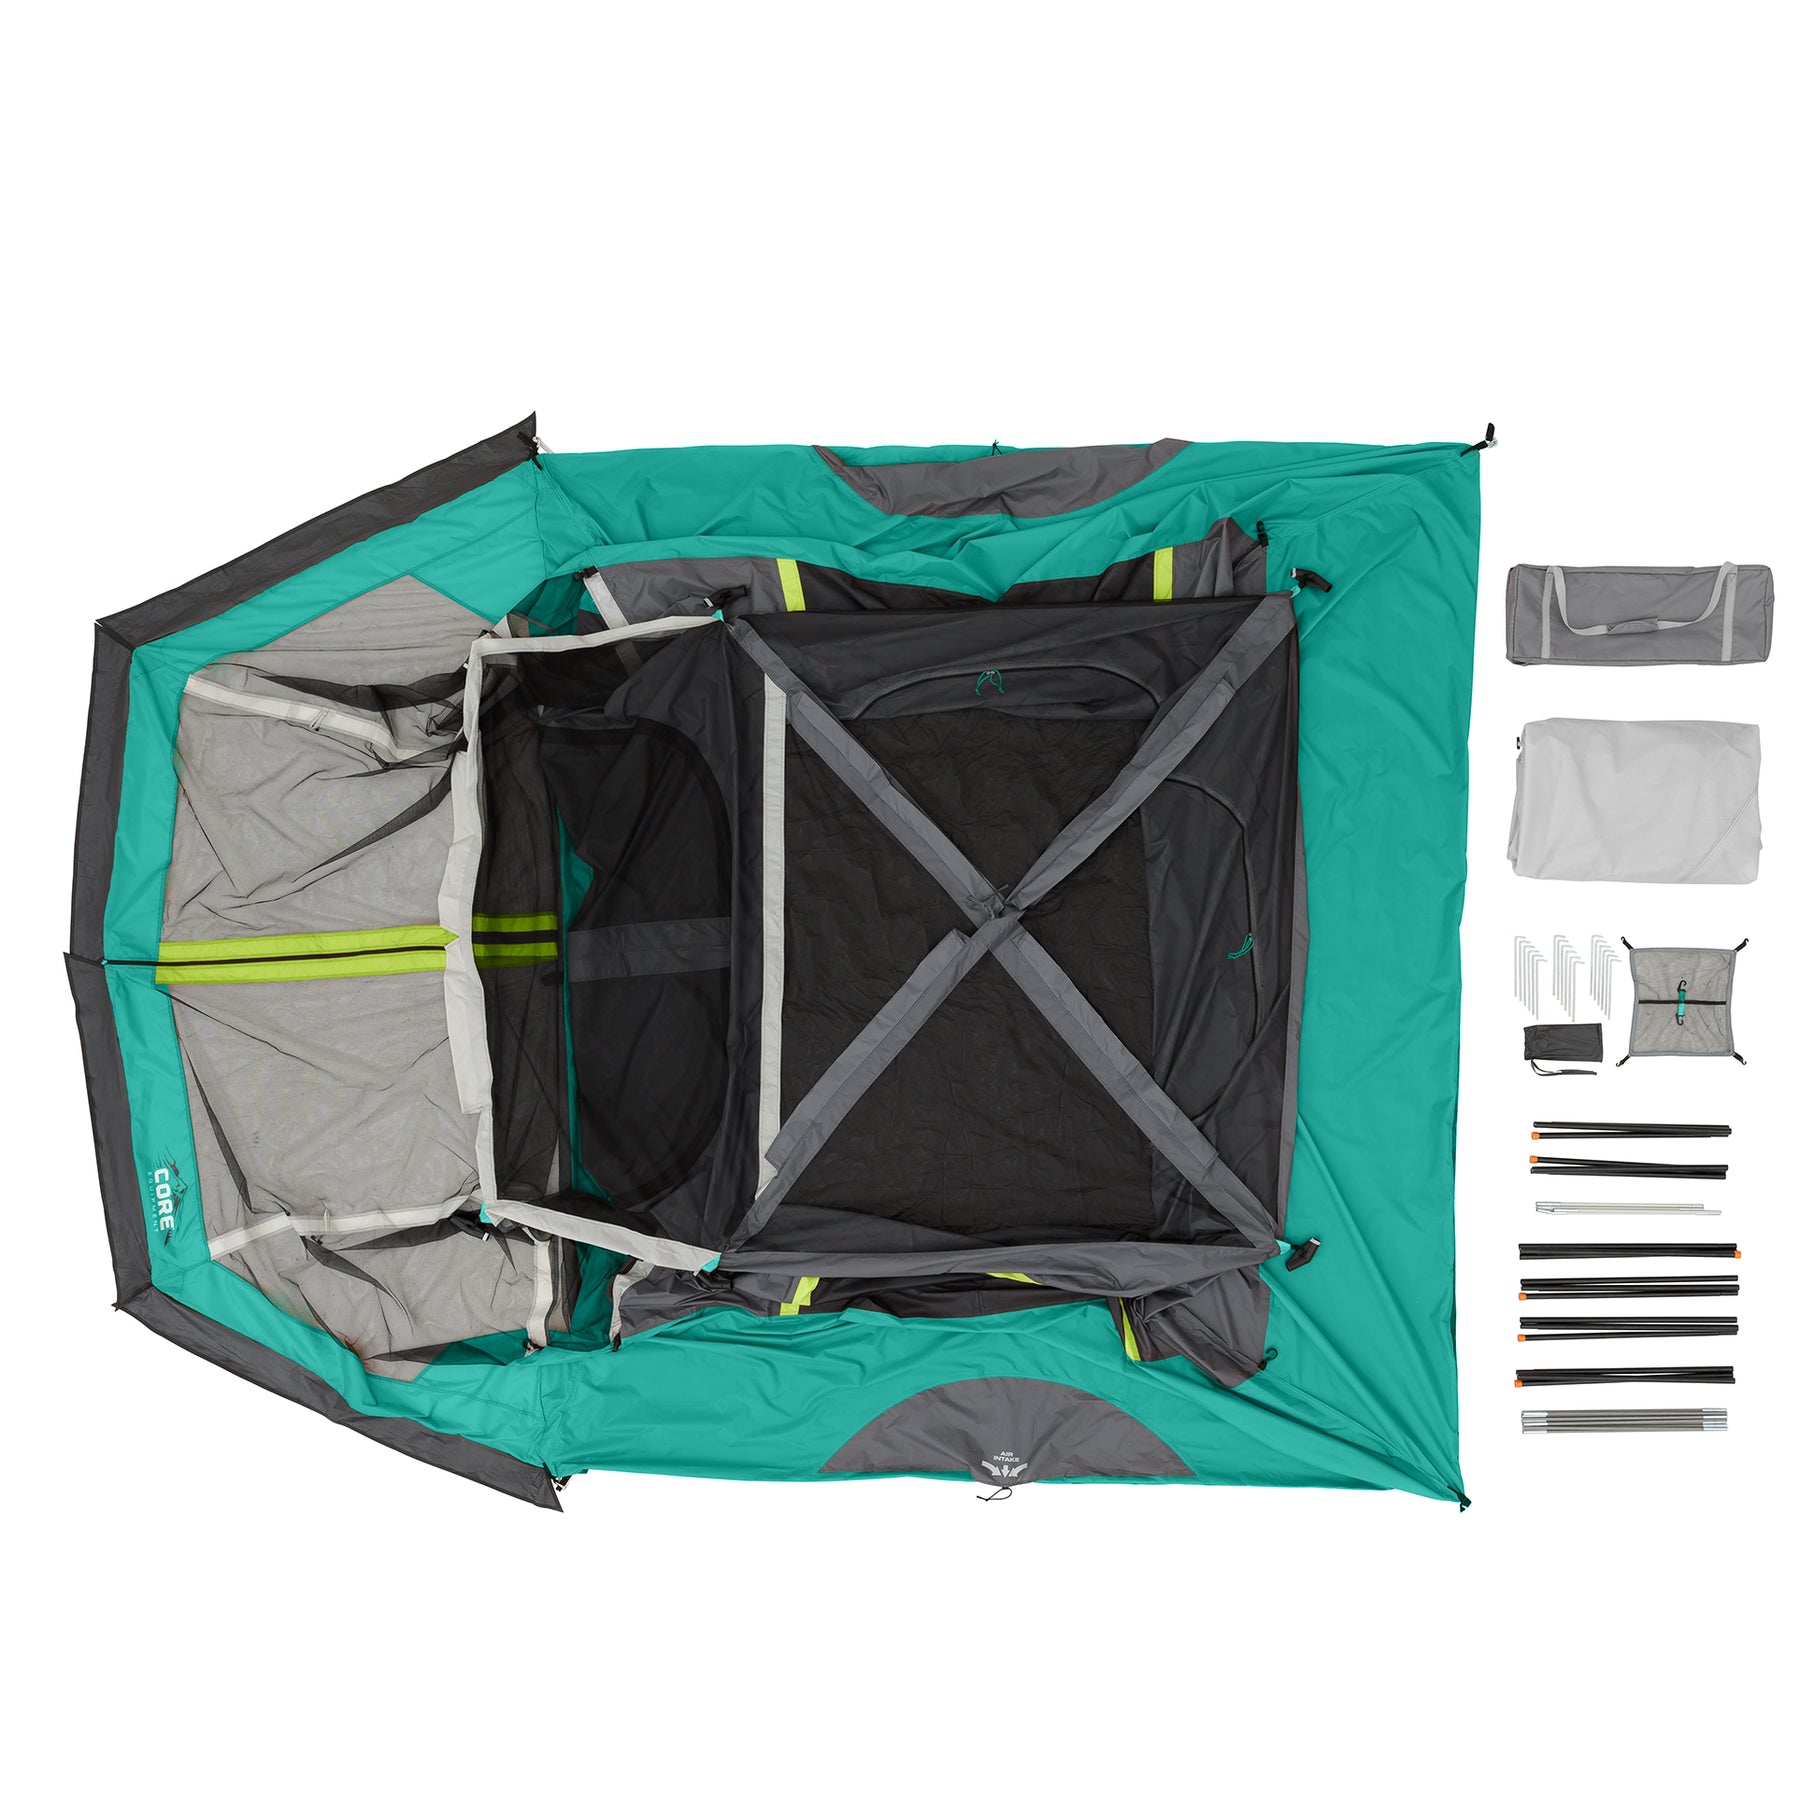 6 Person Straight Wall Cabin Tent with Screen Room 10' x 9' – Core Equipment